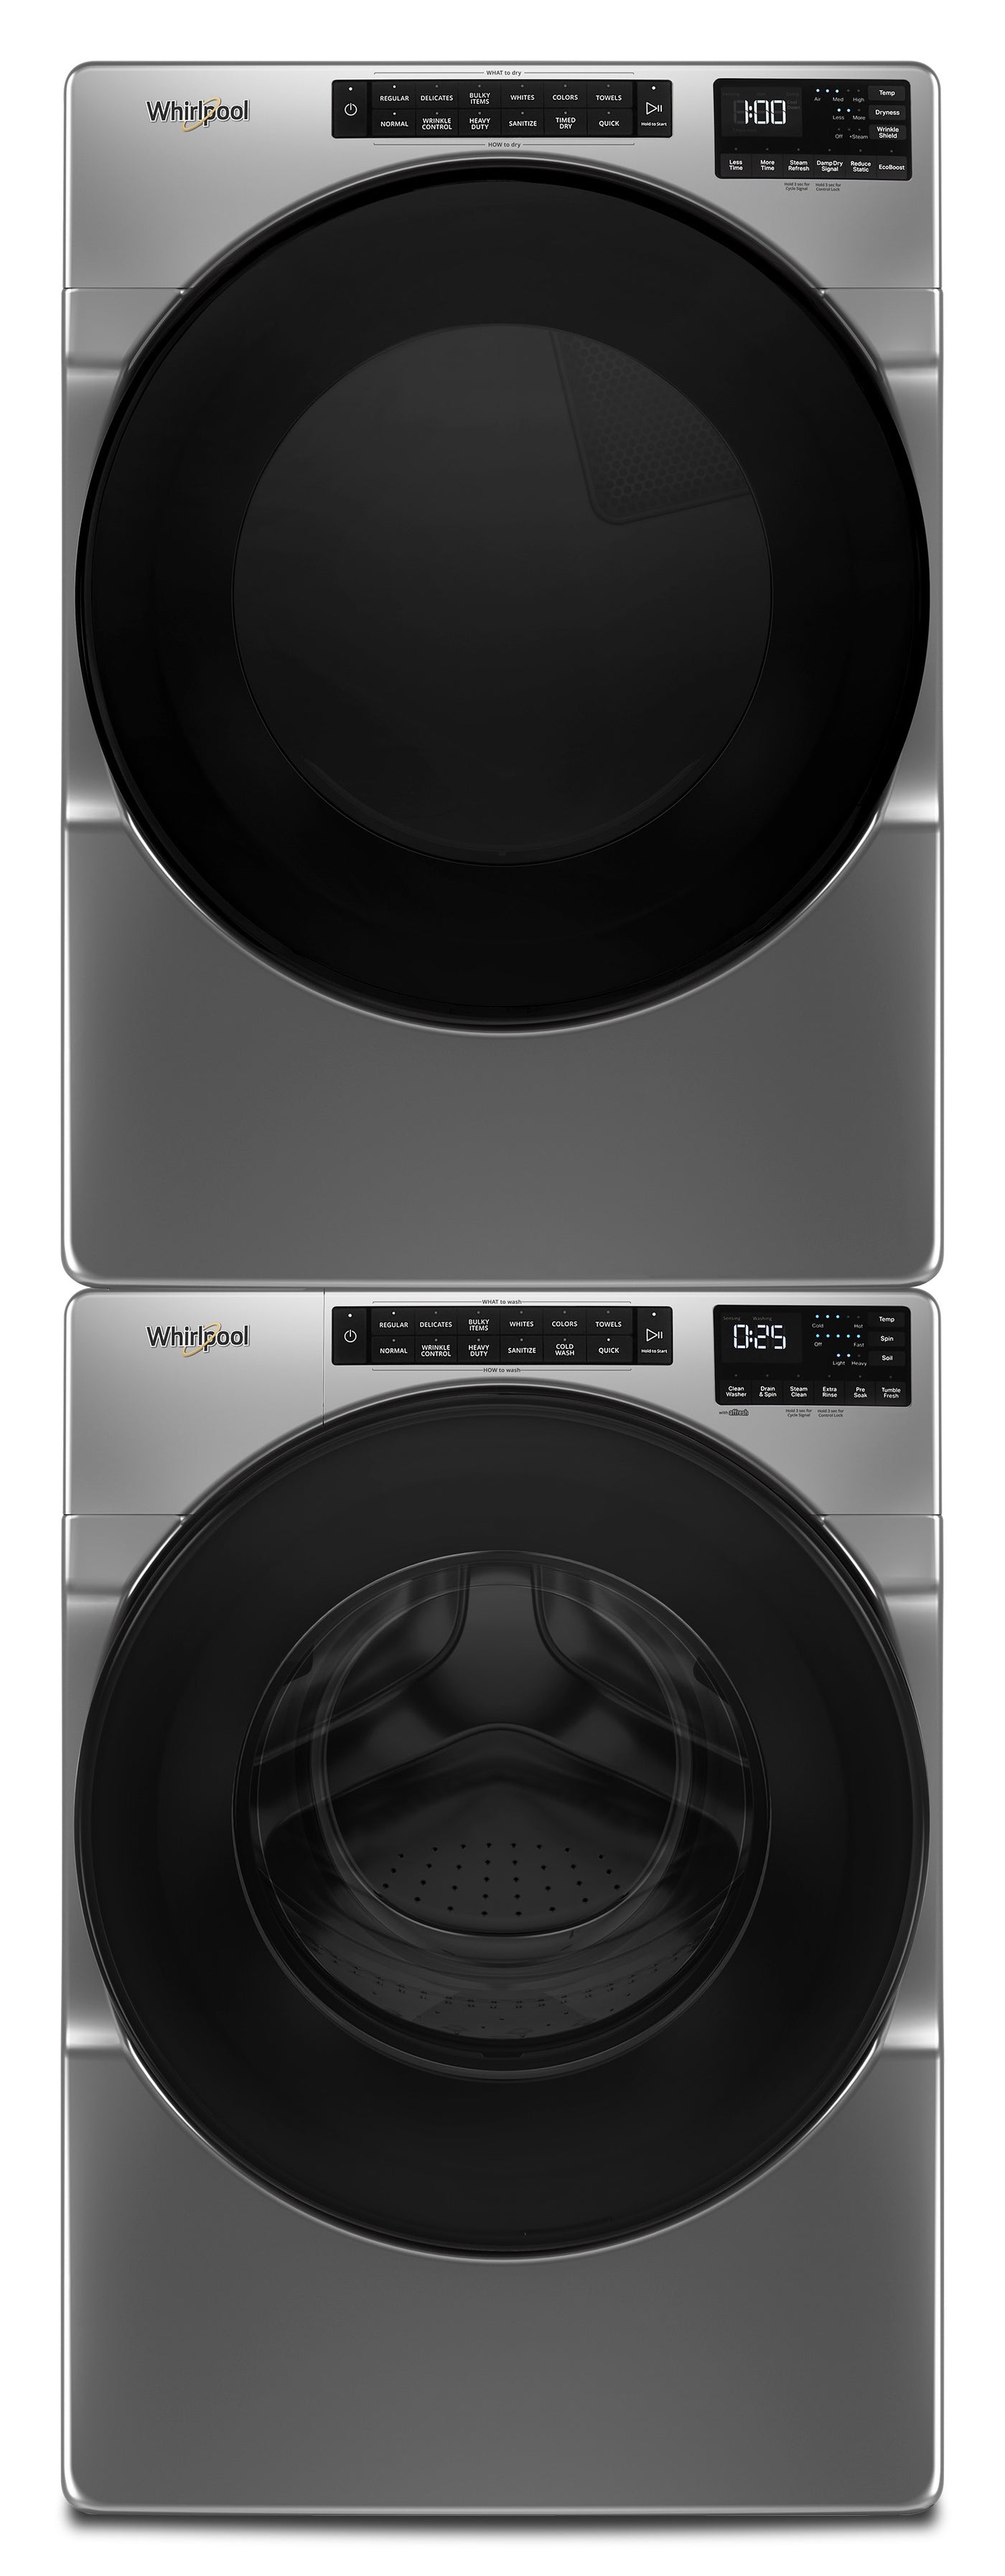 Whirlpool Chrome Shadow Front-Load Washer (5.8 cu. ft.) & Electric Dryer (7.4 cu. ft.) - WFW6605MC/YWED6605MC